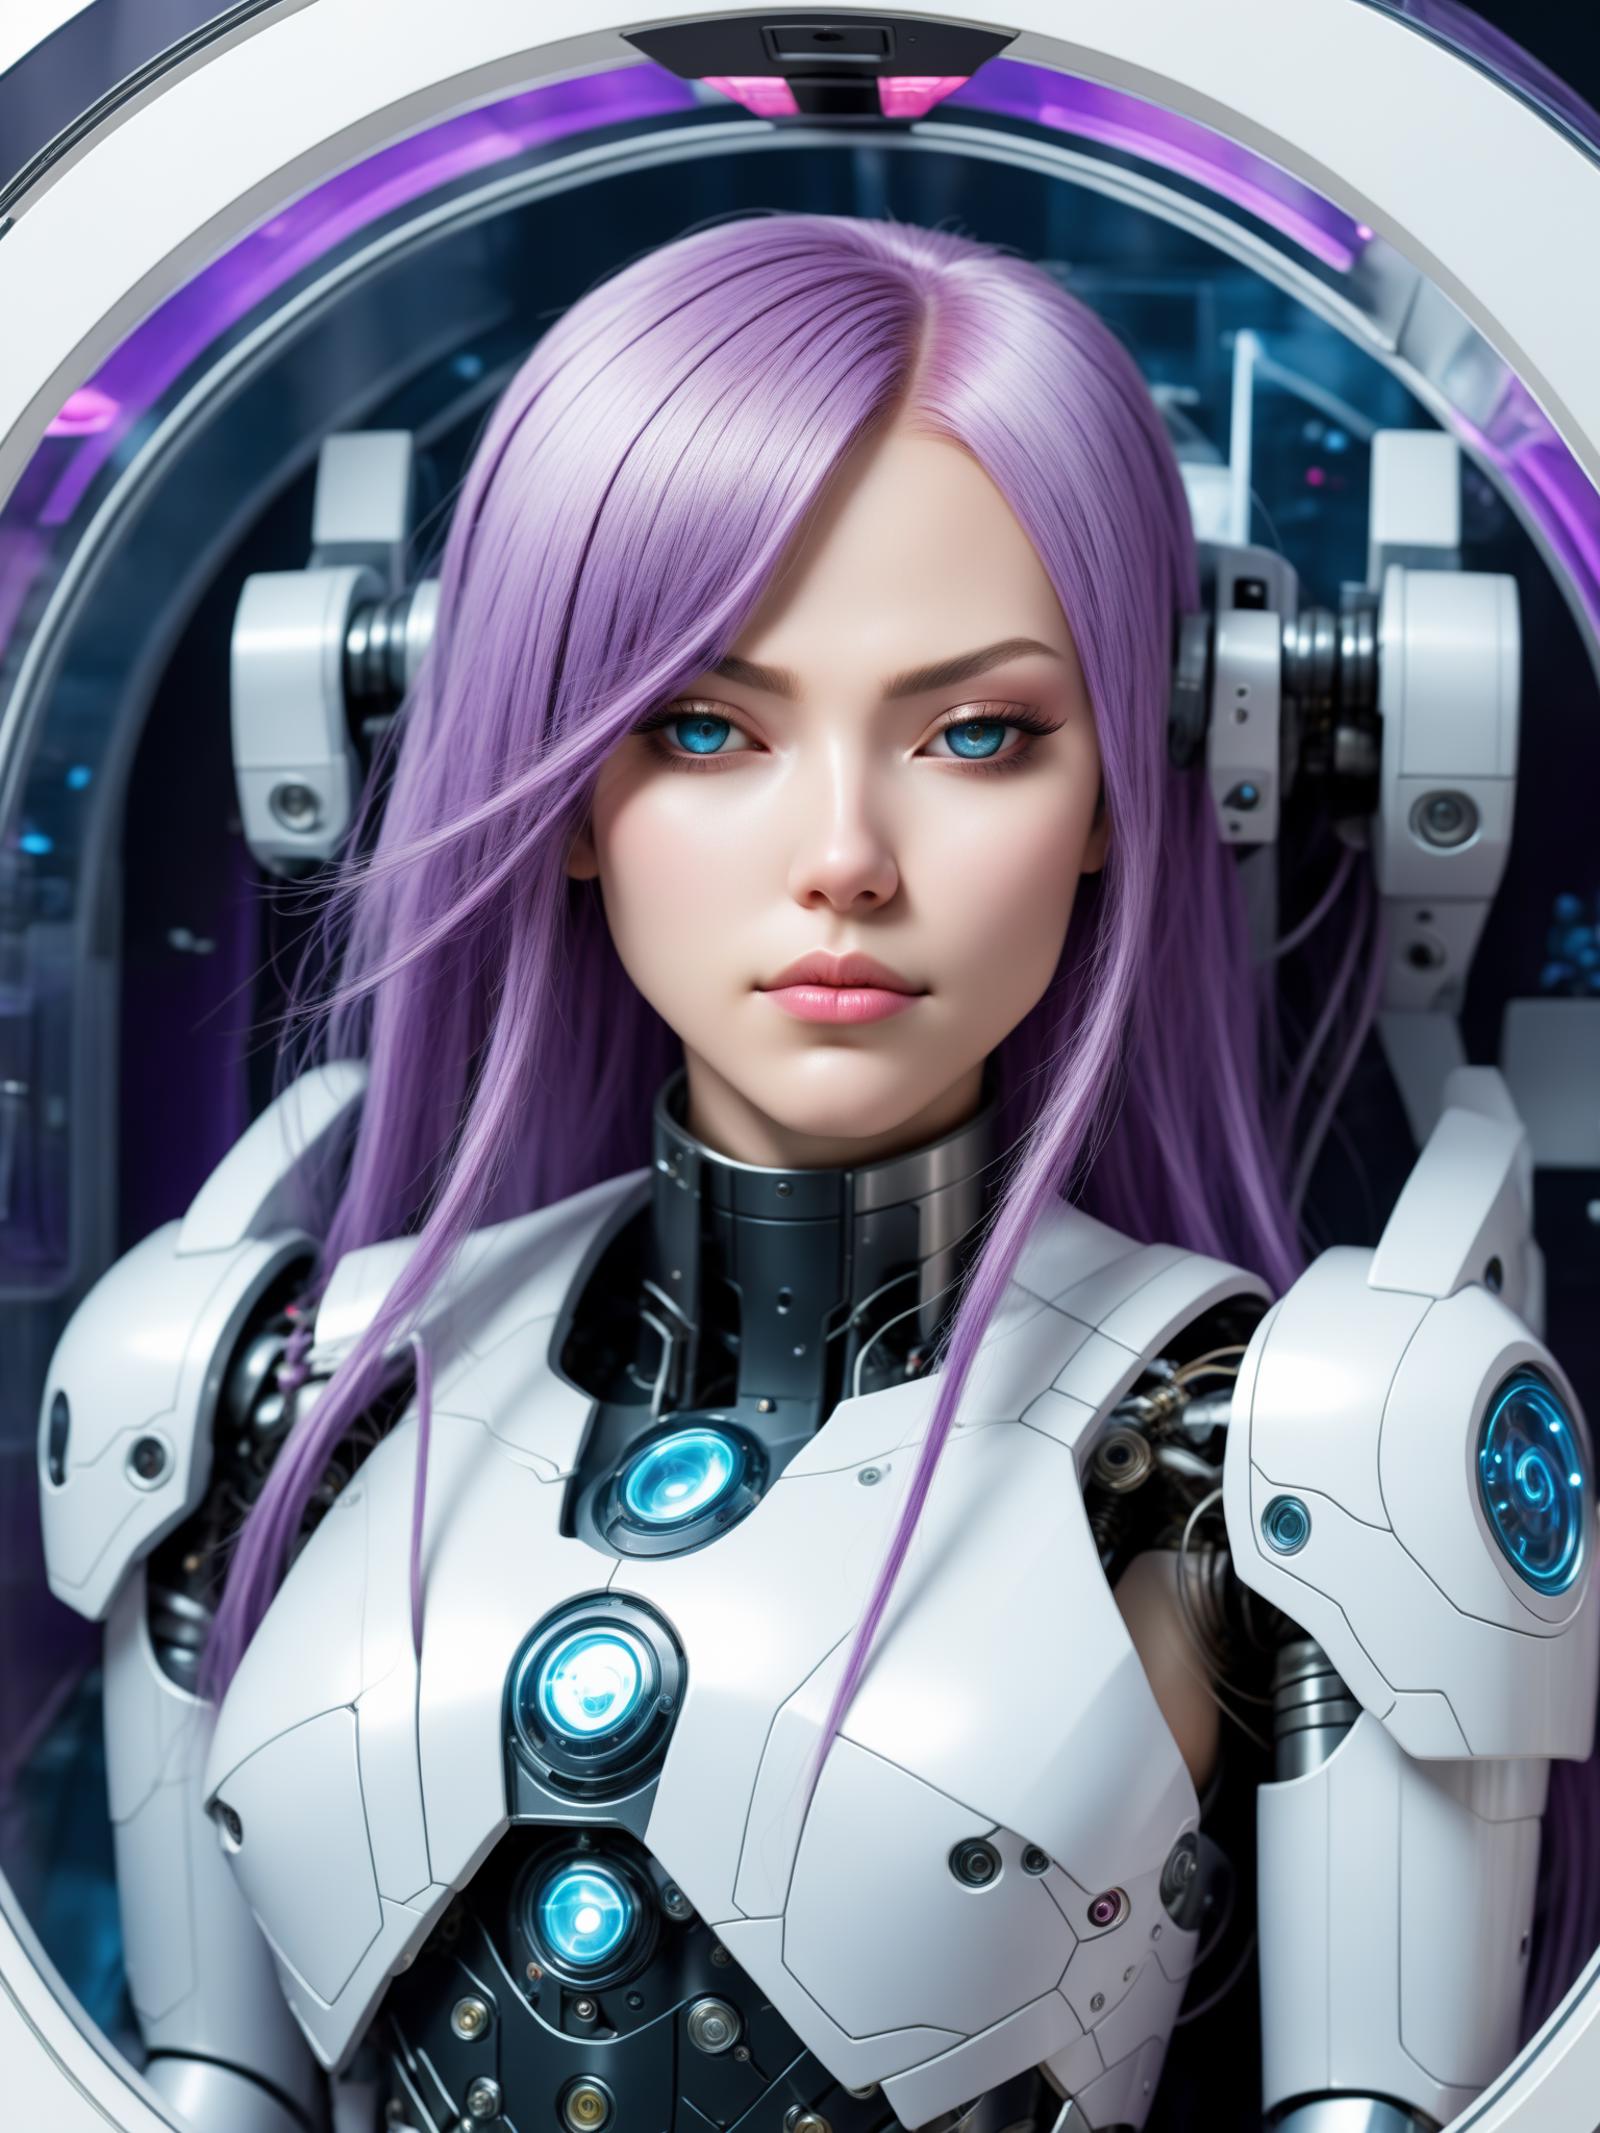 AI model image by artistenergy990